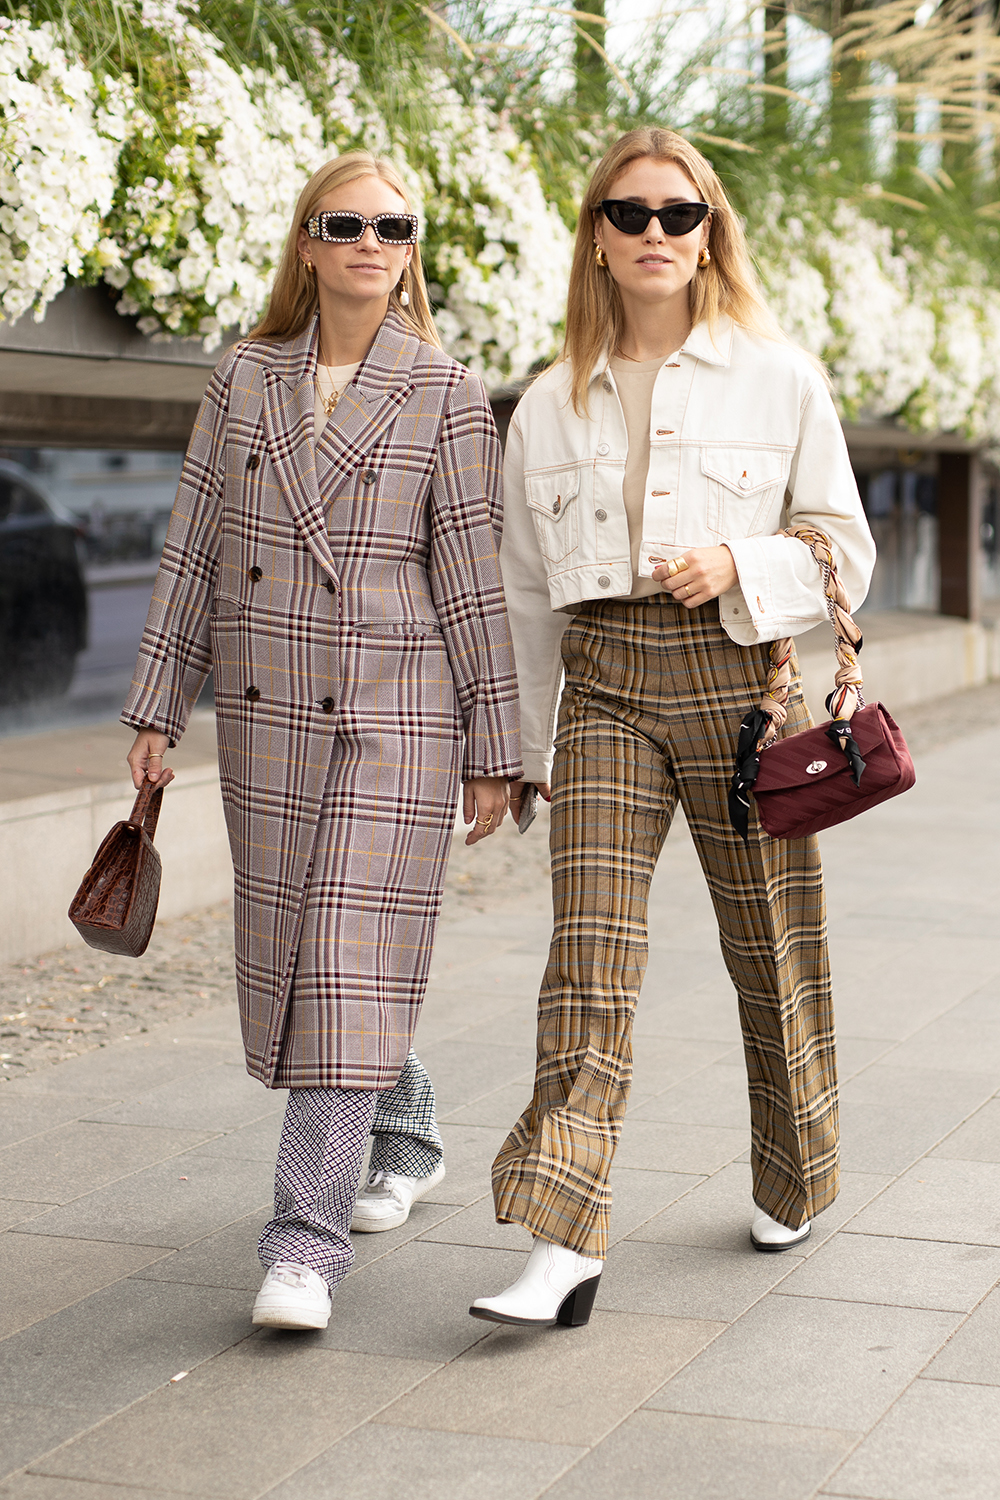 STOCKHOLM, SWEDEN - AUGUST 29: Guests are seen on the street during Fashion Week Stockholm SS19 on August 29, 2018 in Stockholm, Sweden. (Photo by Matthew Sperzel/Getty Images)